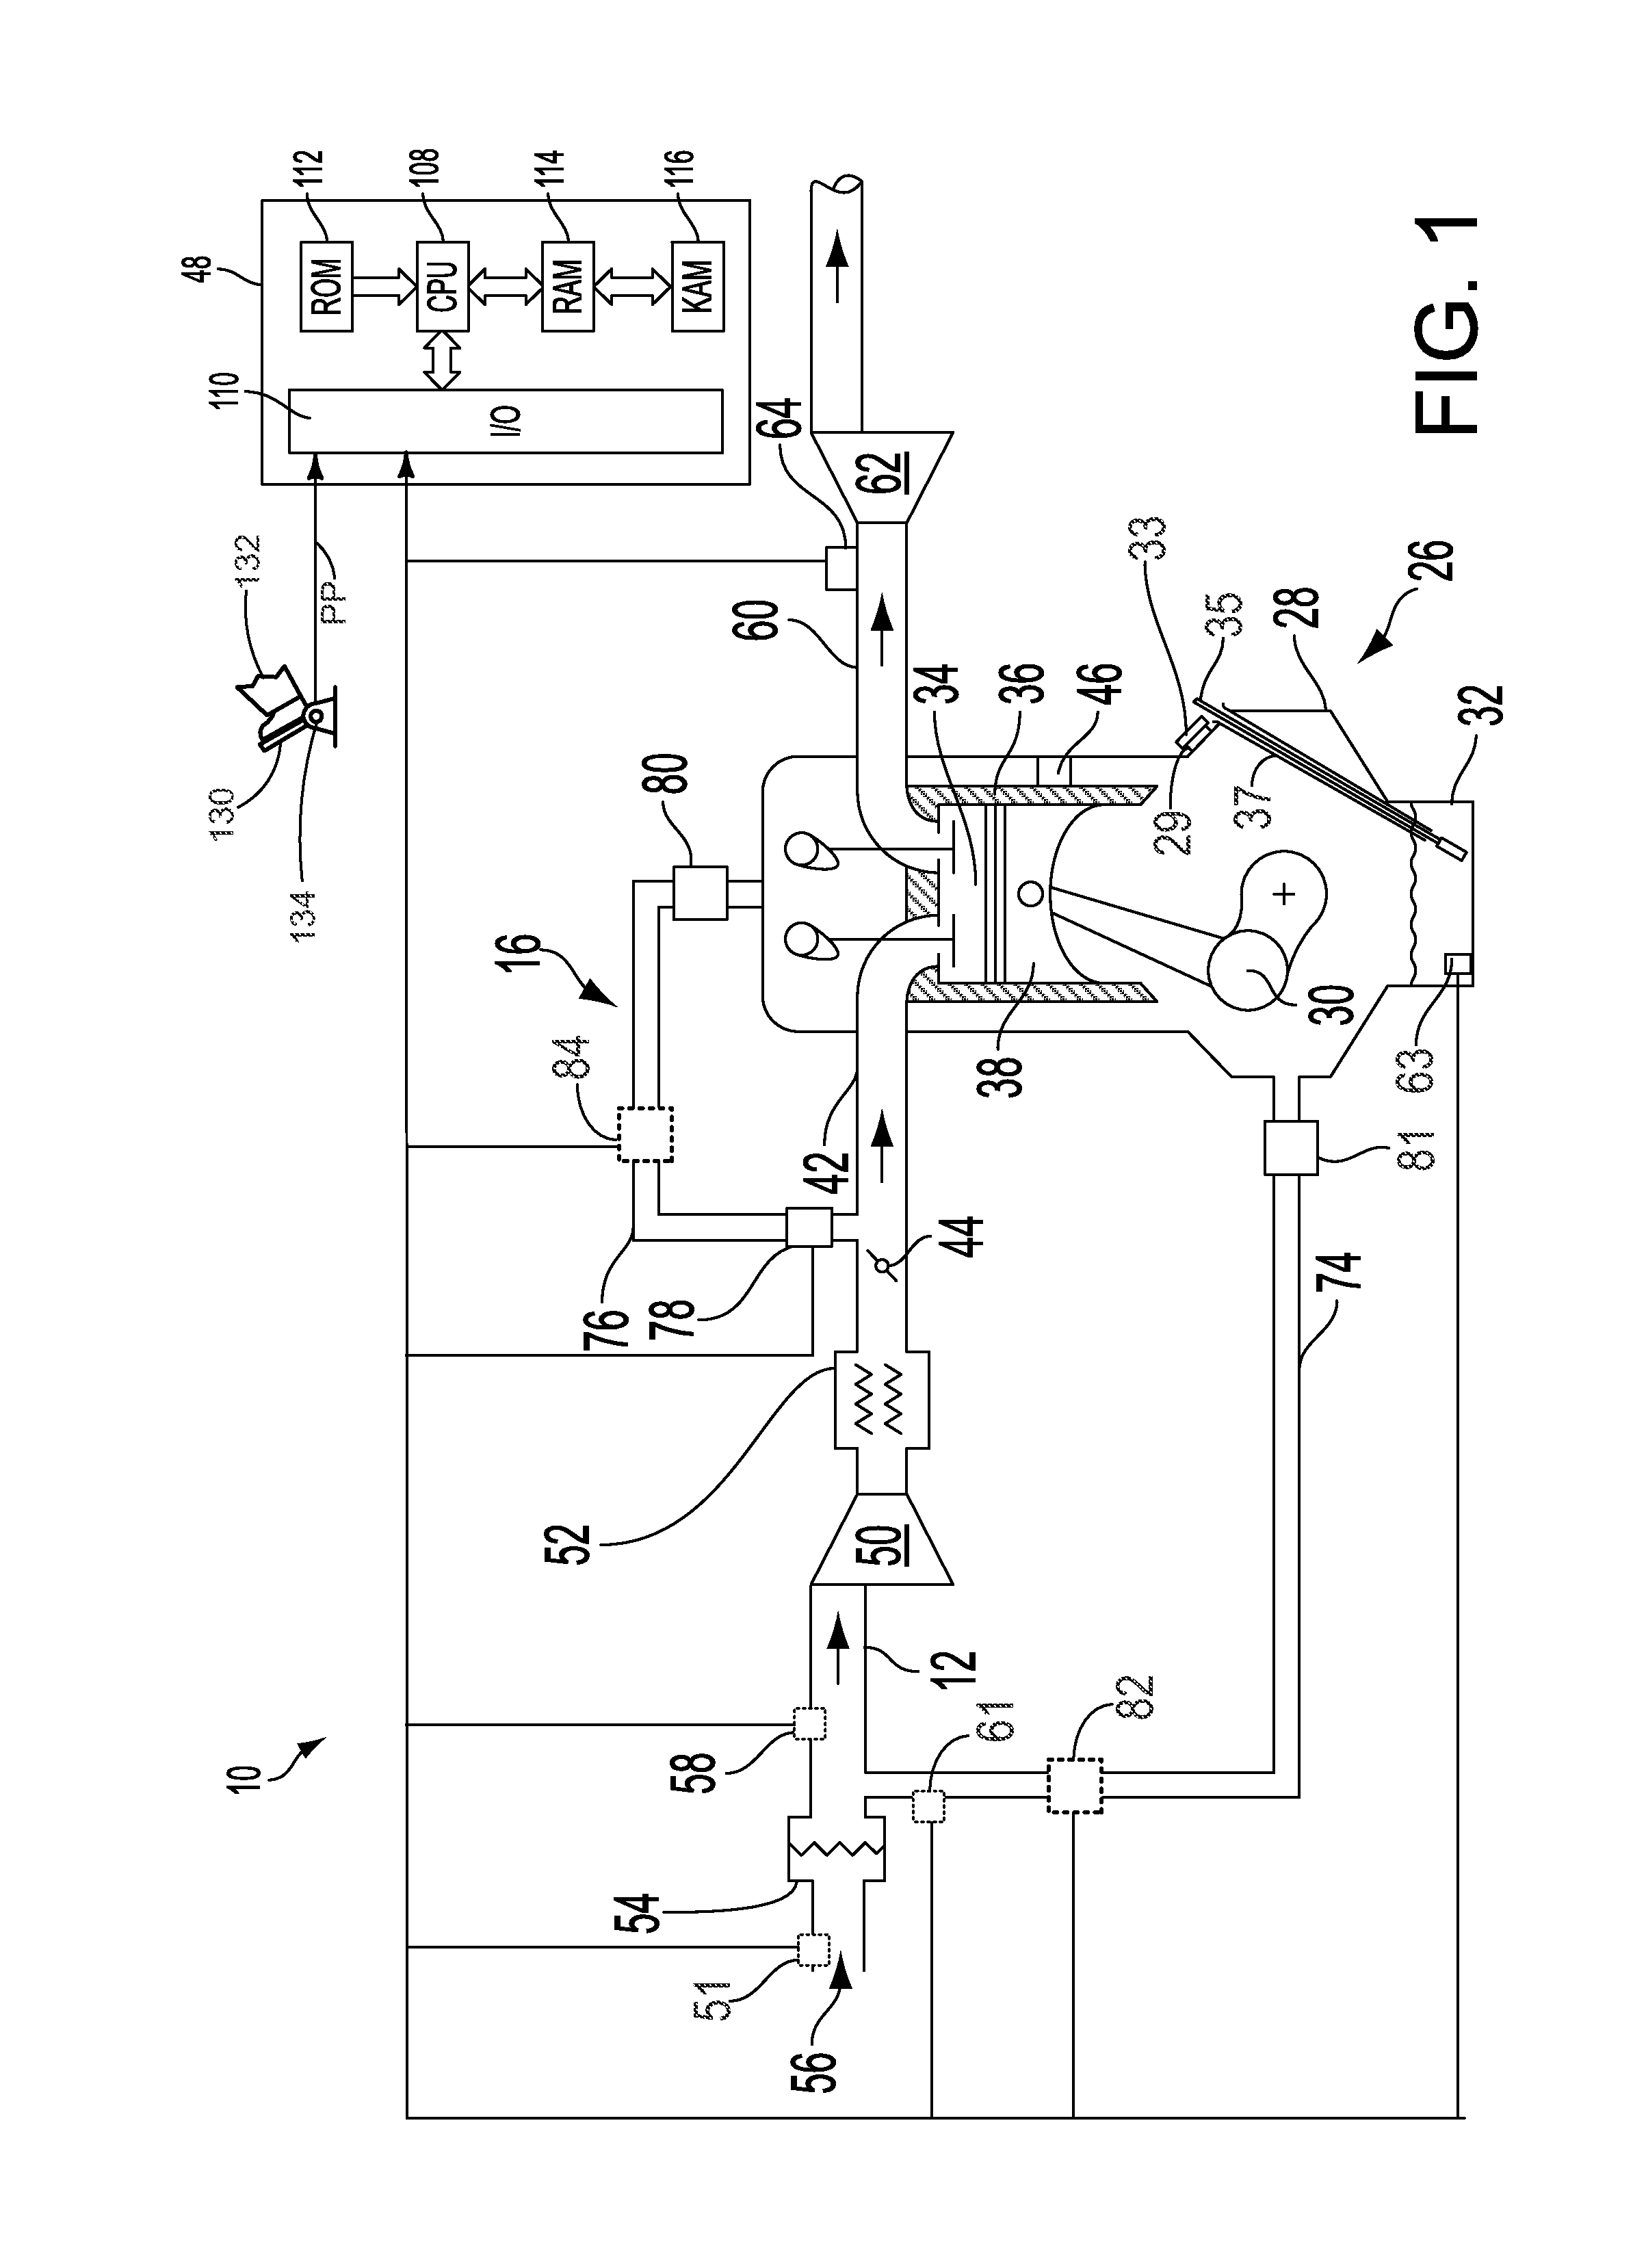 Method for determining crankcase breach and oil level